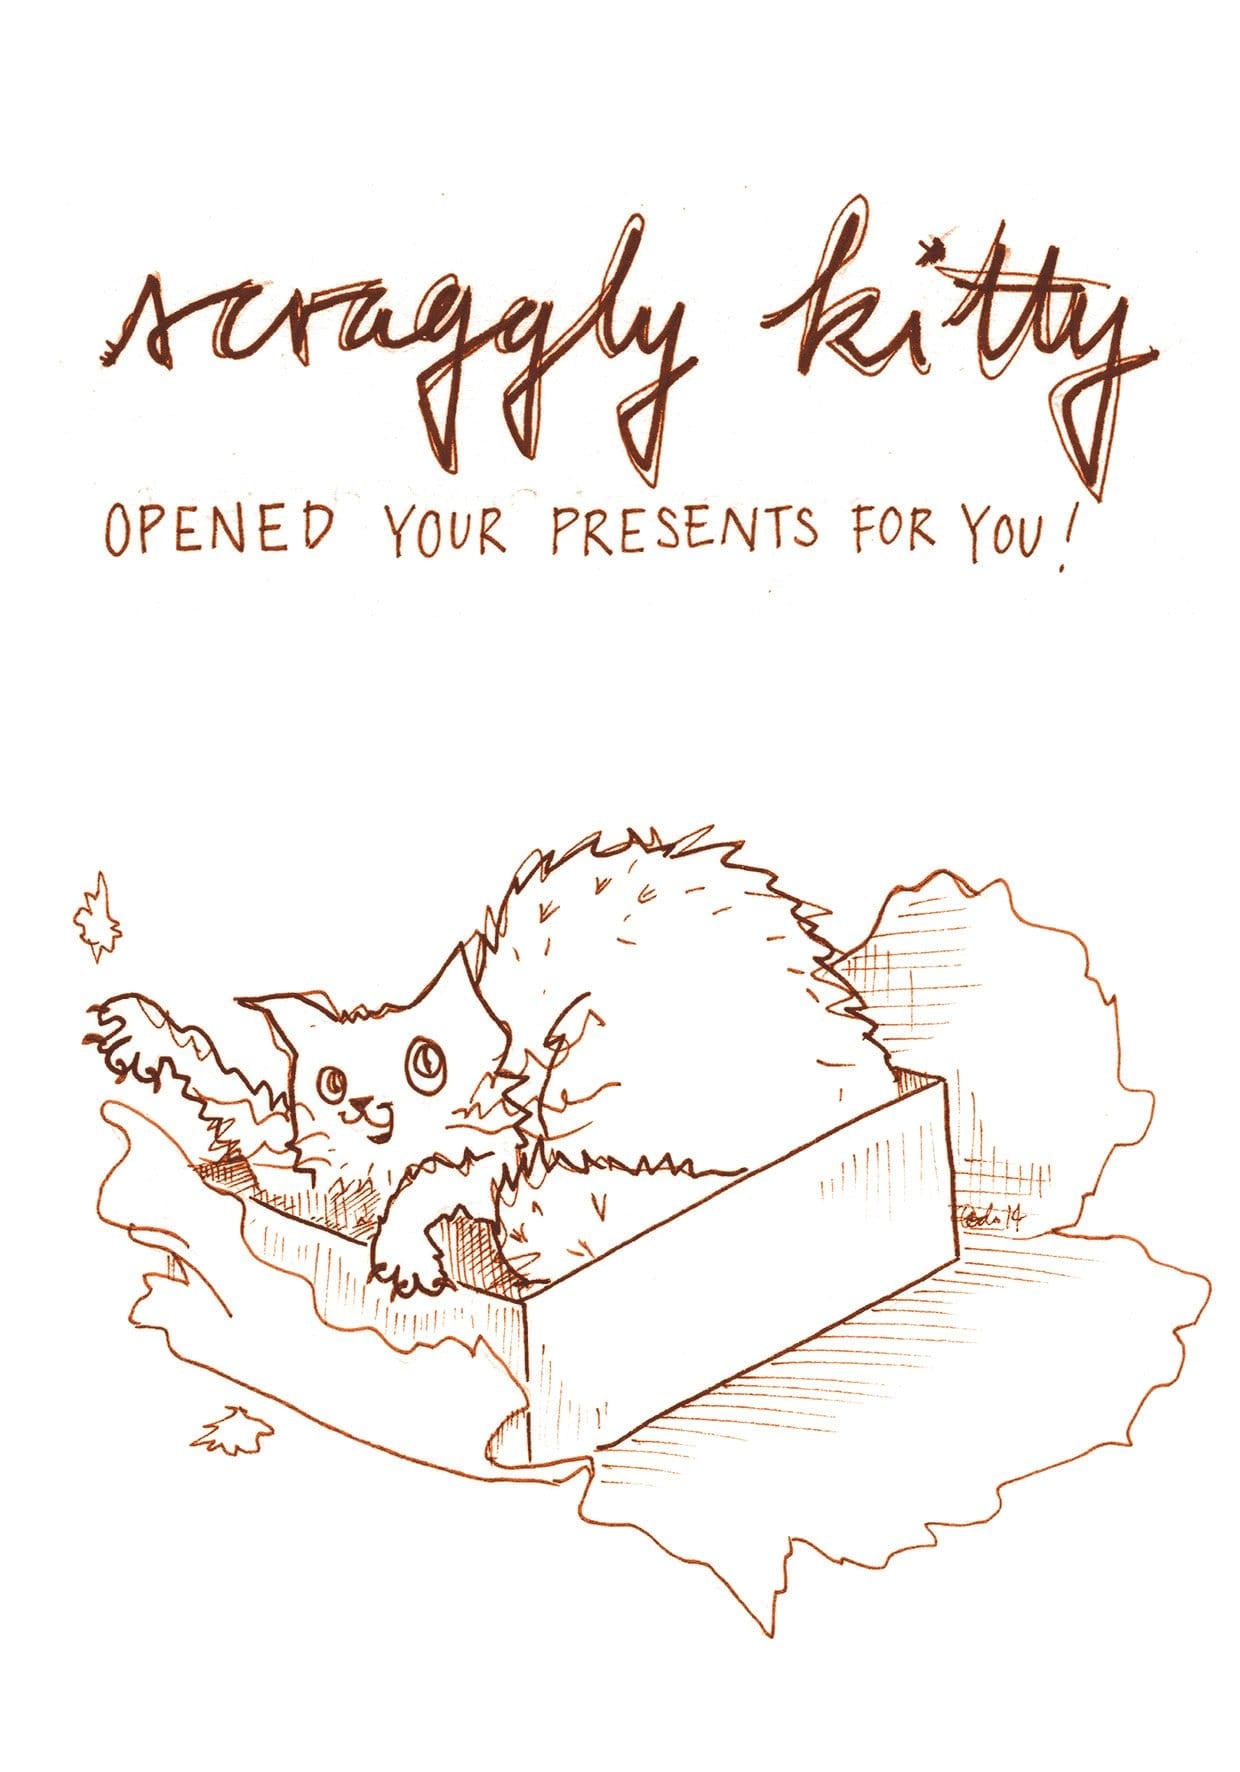 Scraggly Kitty Opened Your Presents For You Greeting Card Scraggly Kitty Greeting Cards Card